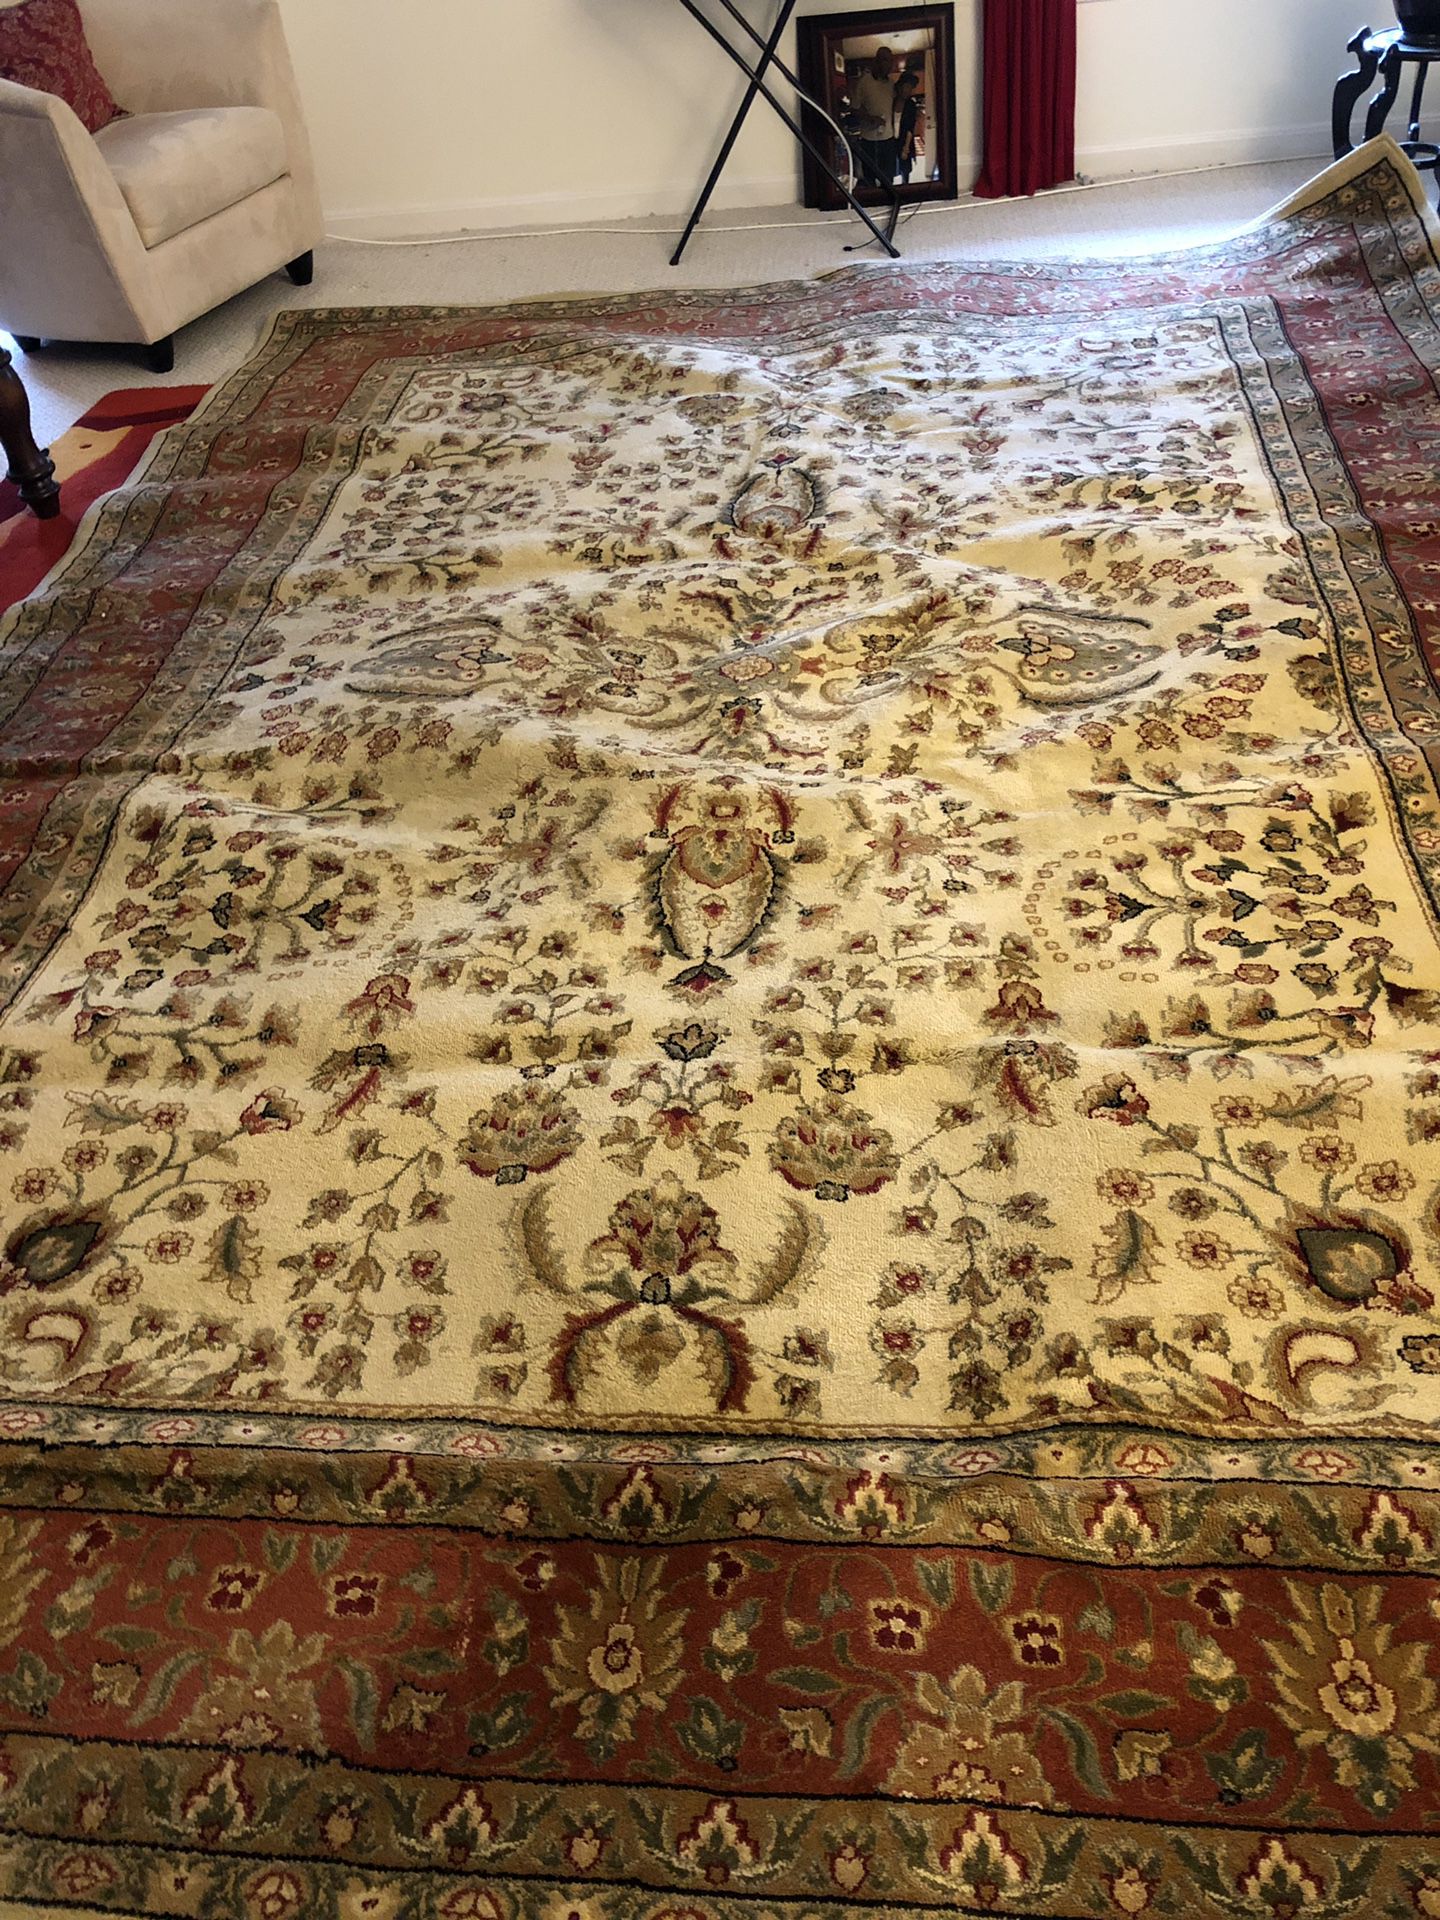 Safavid Lyndhurst Collection, 100% Polypropylene Rug. Easy cleaning. Just sweep, vacuum, or rinse off with a garden hose.